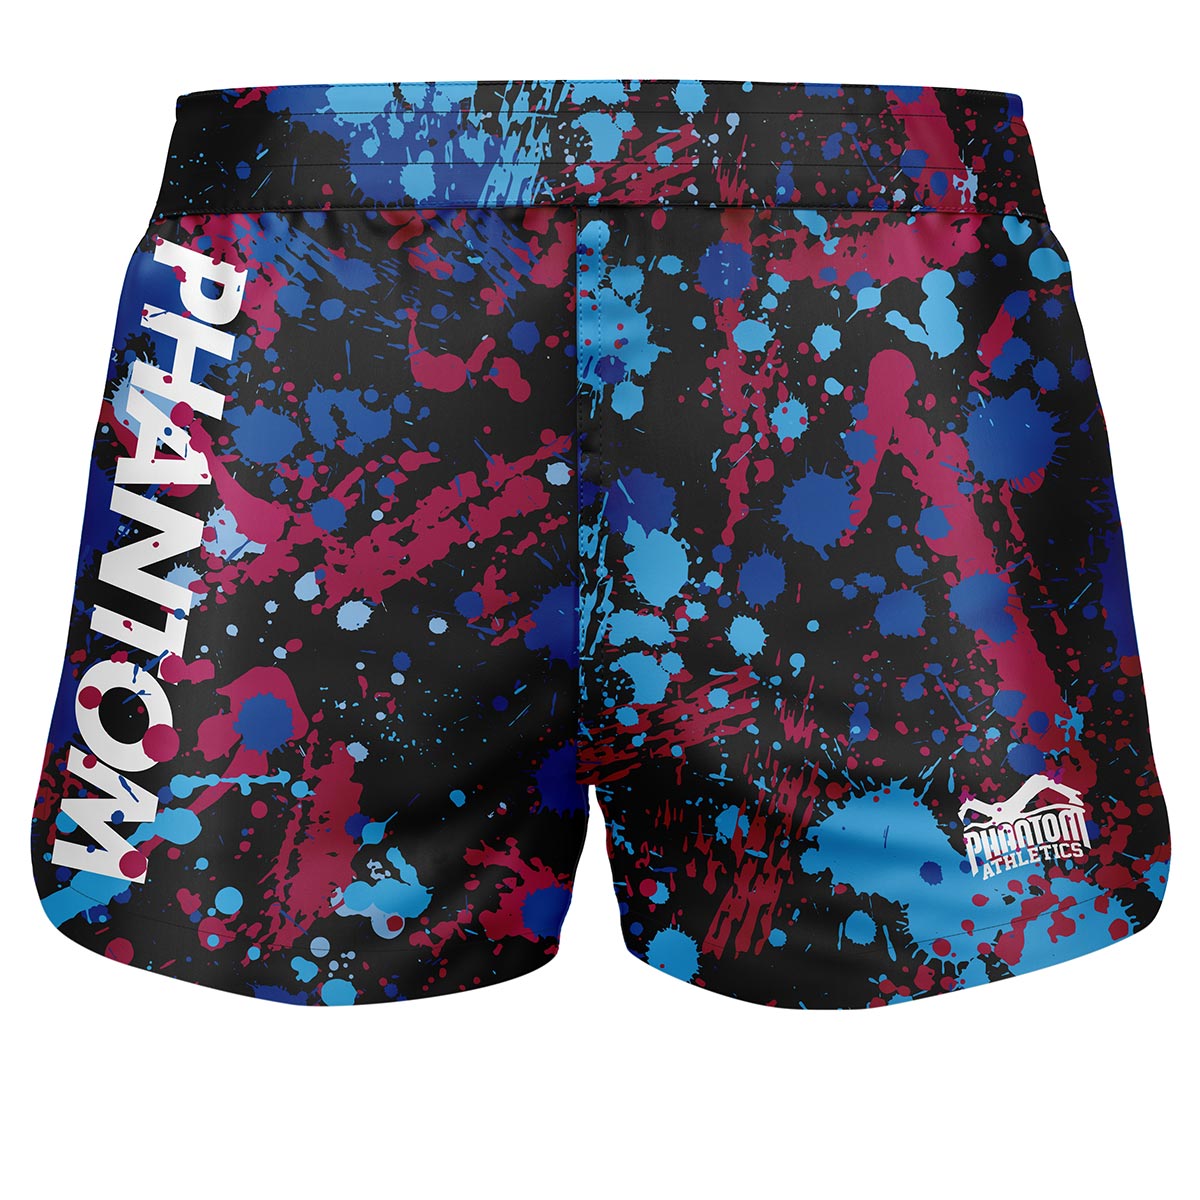 Phantom Fightshorts Fusion 2in1. Ultimate shorts for your martial arts. Ideal for MMA, Muay Thai, BJJ, wrestling and more. In an eye-catching splatter design with blue/purple splashes.